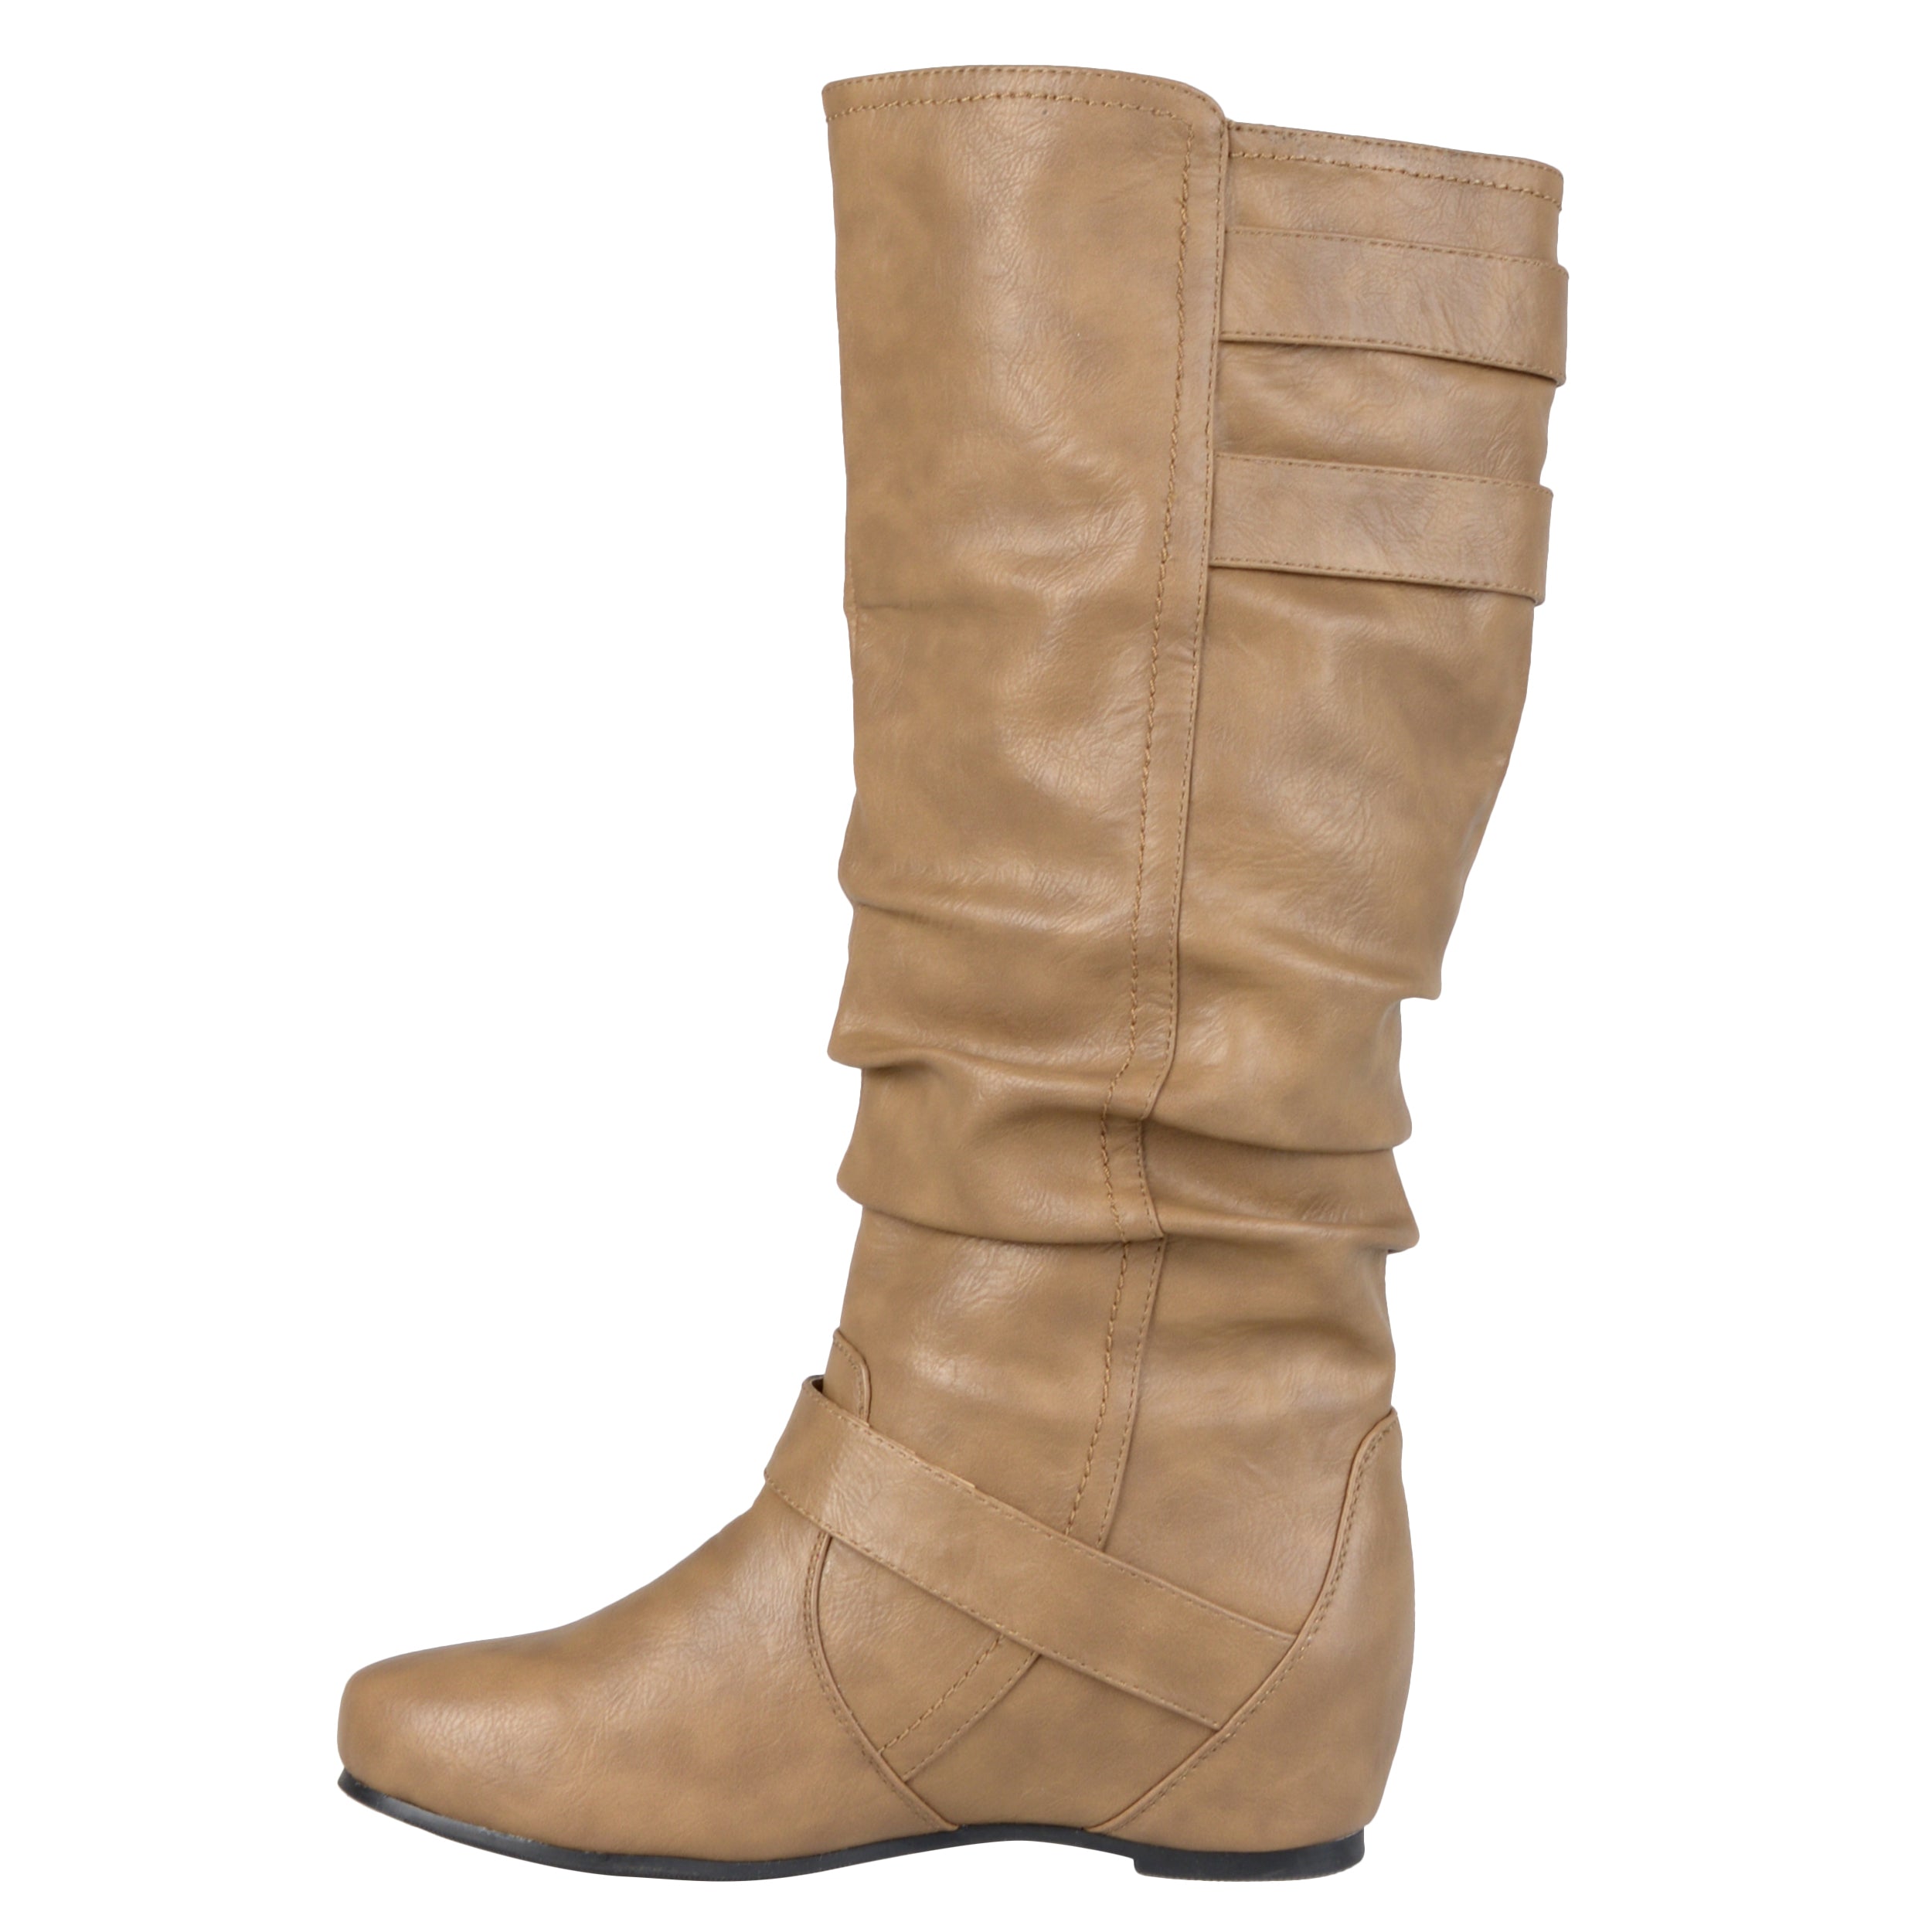 Tiffany Wide Calf Boots | Women's Slouchy Boots | Journee Collection